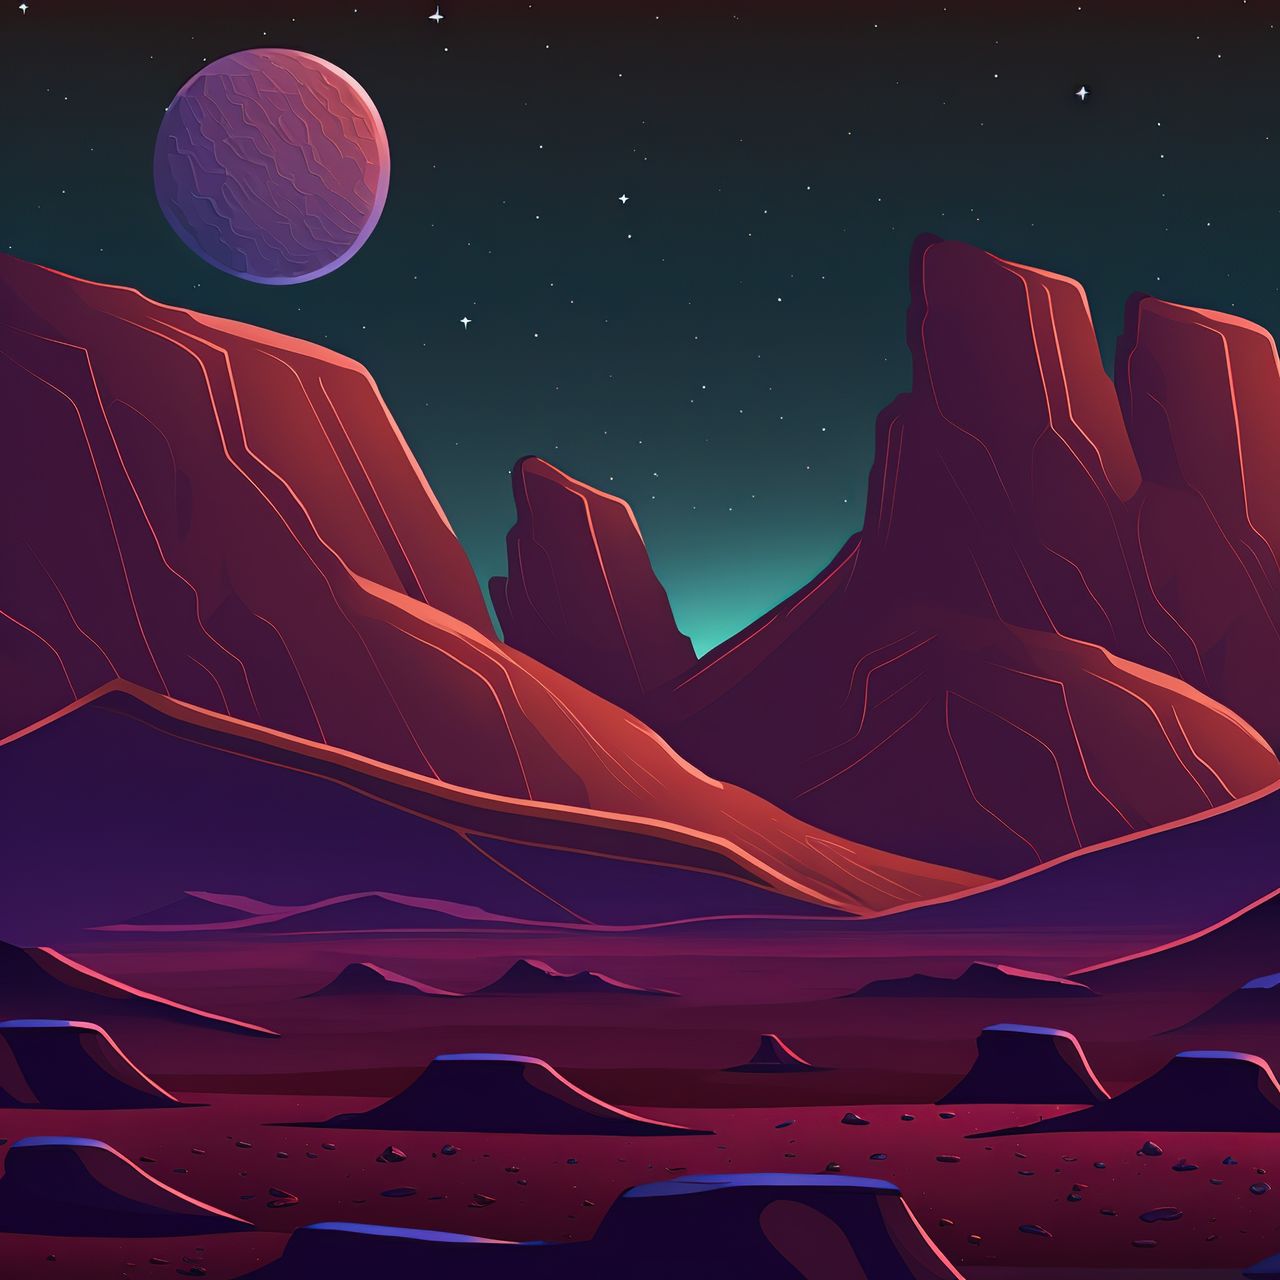 The surface of an alien planet in orange shades, mountains under the night starry sky with a planet in outer space 3d illustration Planet Background Space Alien Cartoon Cosmos Game Moon Blue Design Ground World Fantasy Galaxy Surface Cosmic Desert Earth Fantastic Futuristic Night Saturn Scene Stone Terrain UI Astrology Astronomy Crater Dark Fiction Illustration Land Landscape Lunar Martian  Mountain